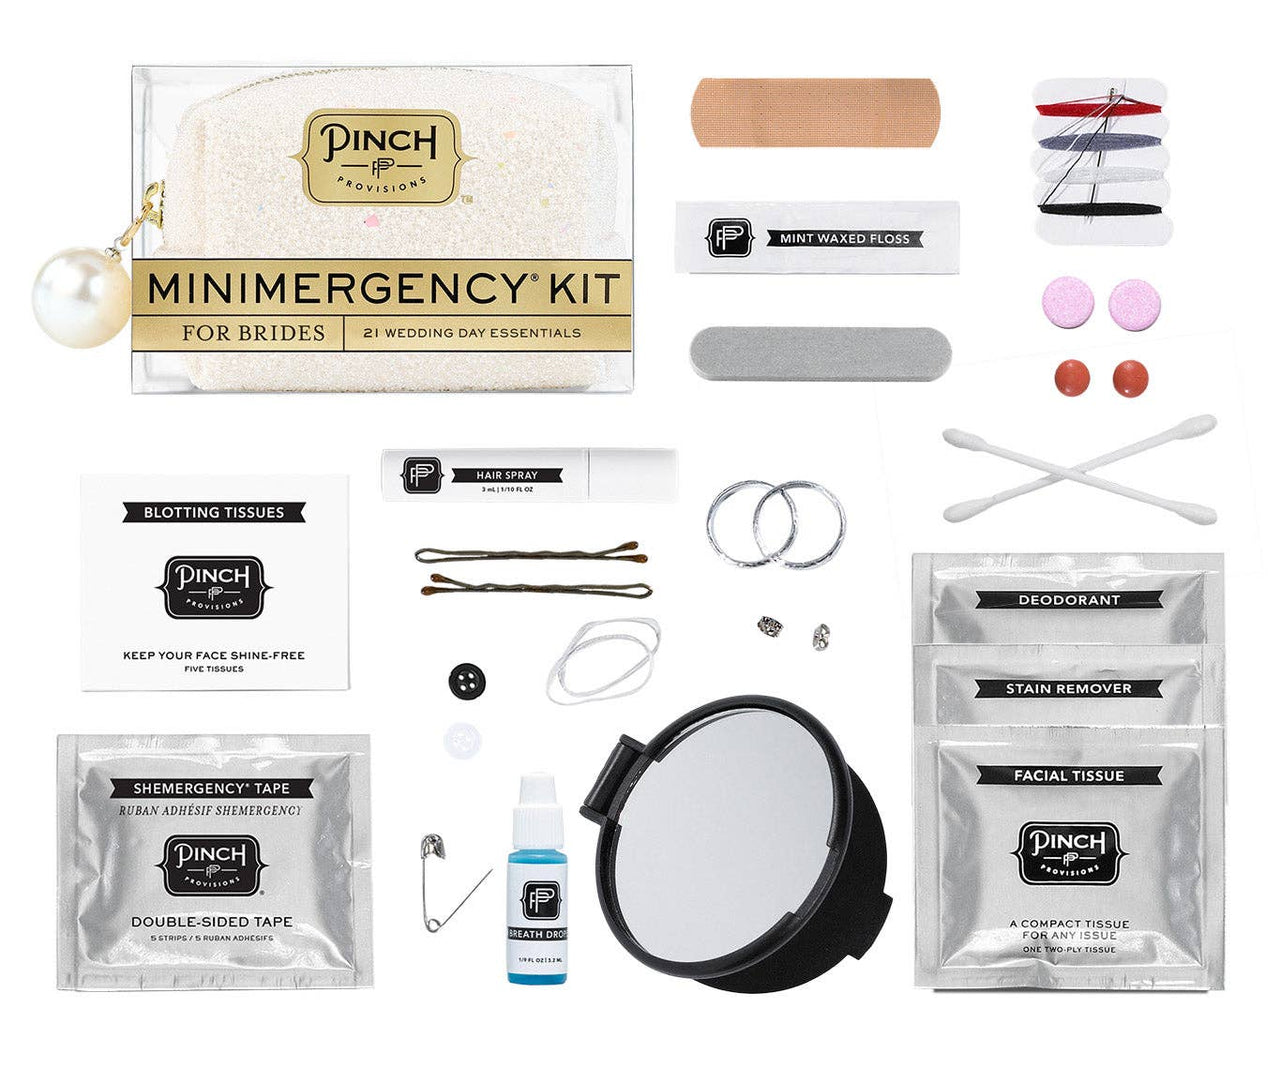 Pearl Minimergency Kit for Brides Pinch Provisions